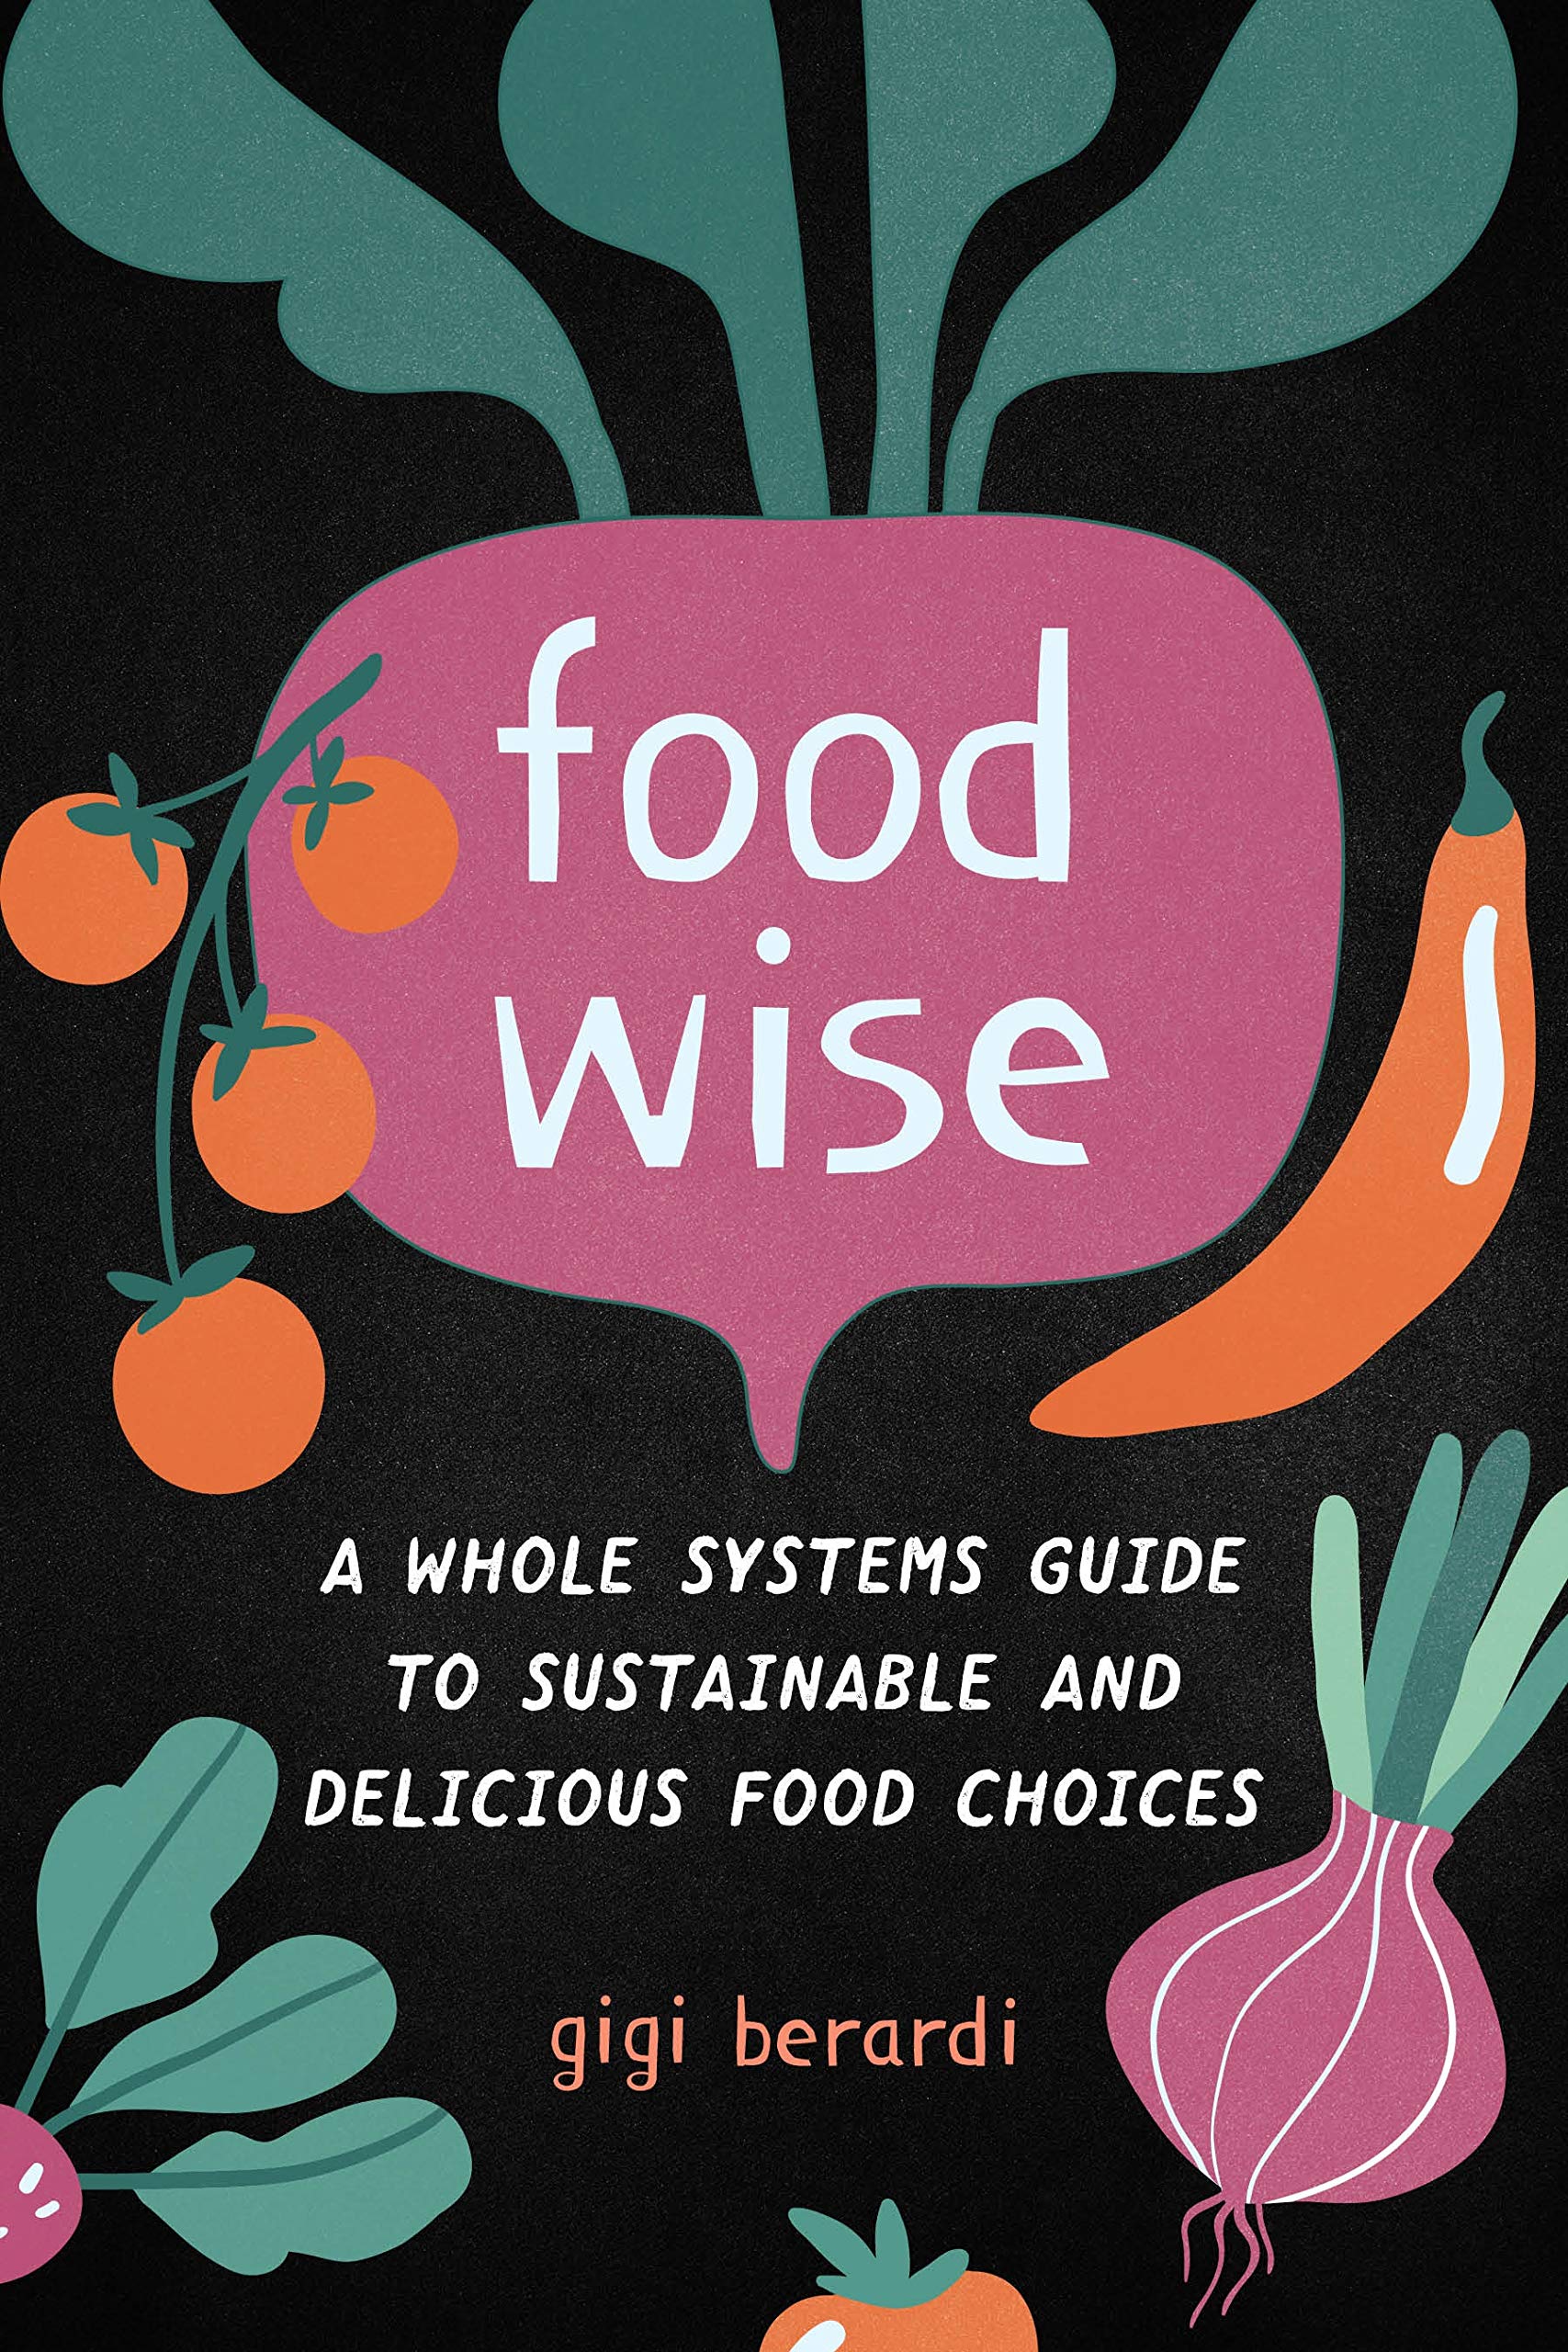 FoodWISE cover shows title and author surrounded by cartoon veggies